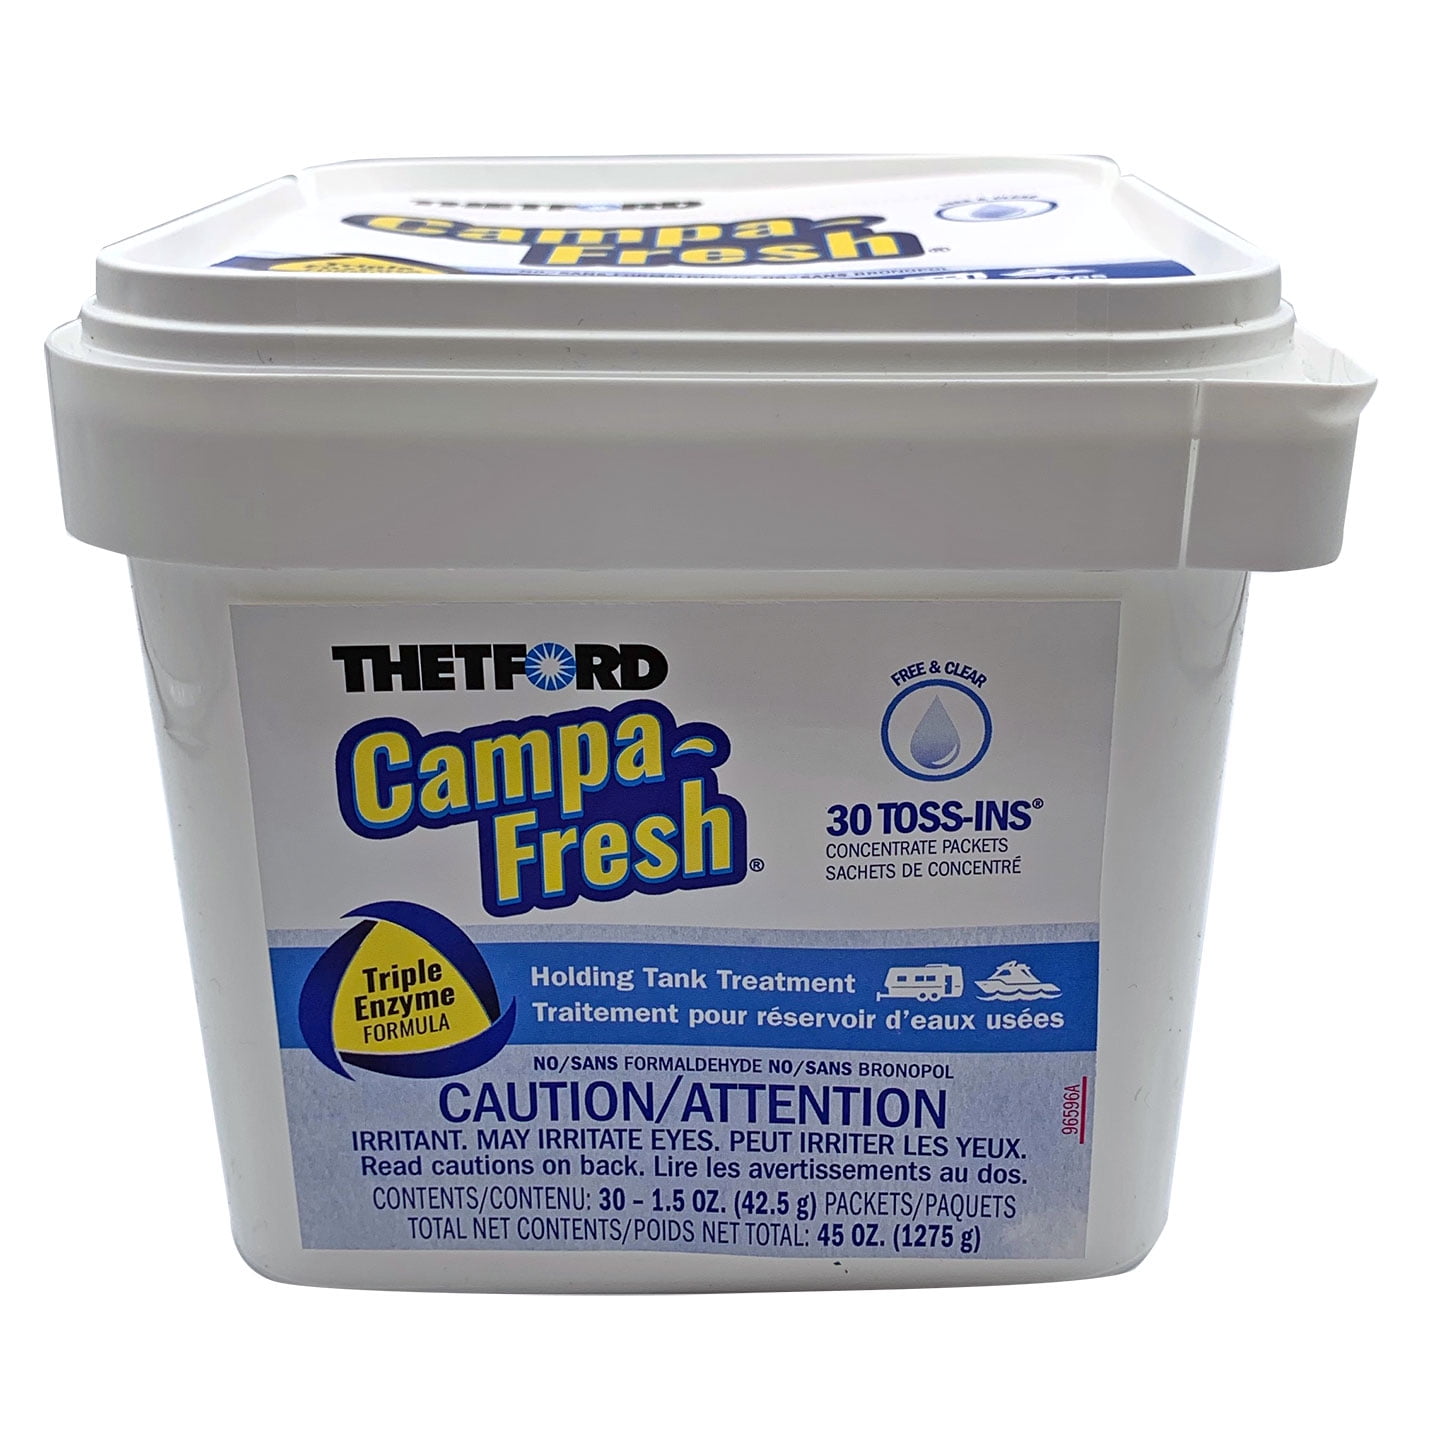 Thetford Campa-Fresh Free and Clear Toss-Ins Holding Tank Treatment, 30 Count